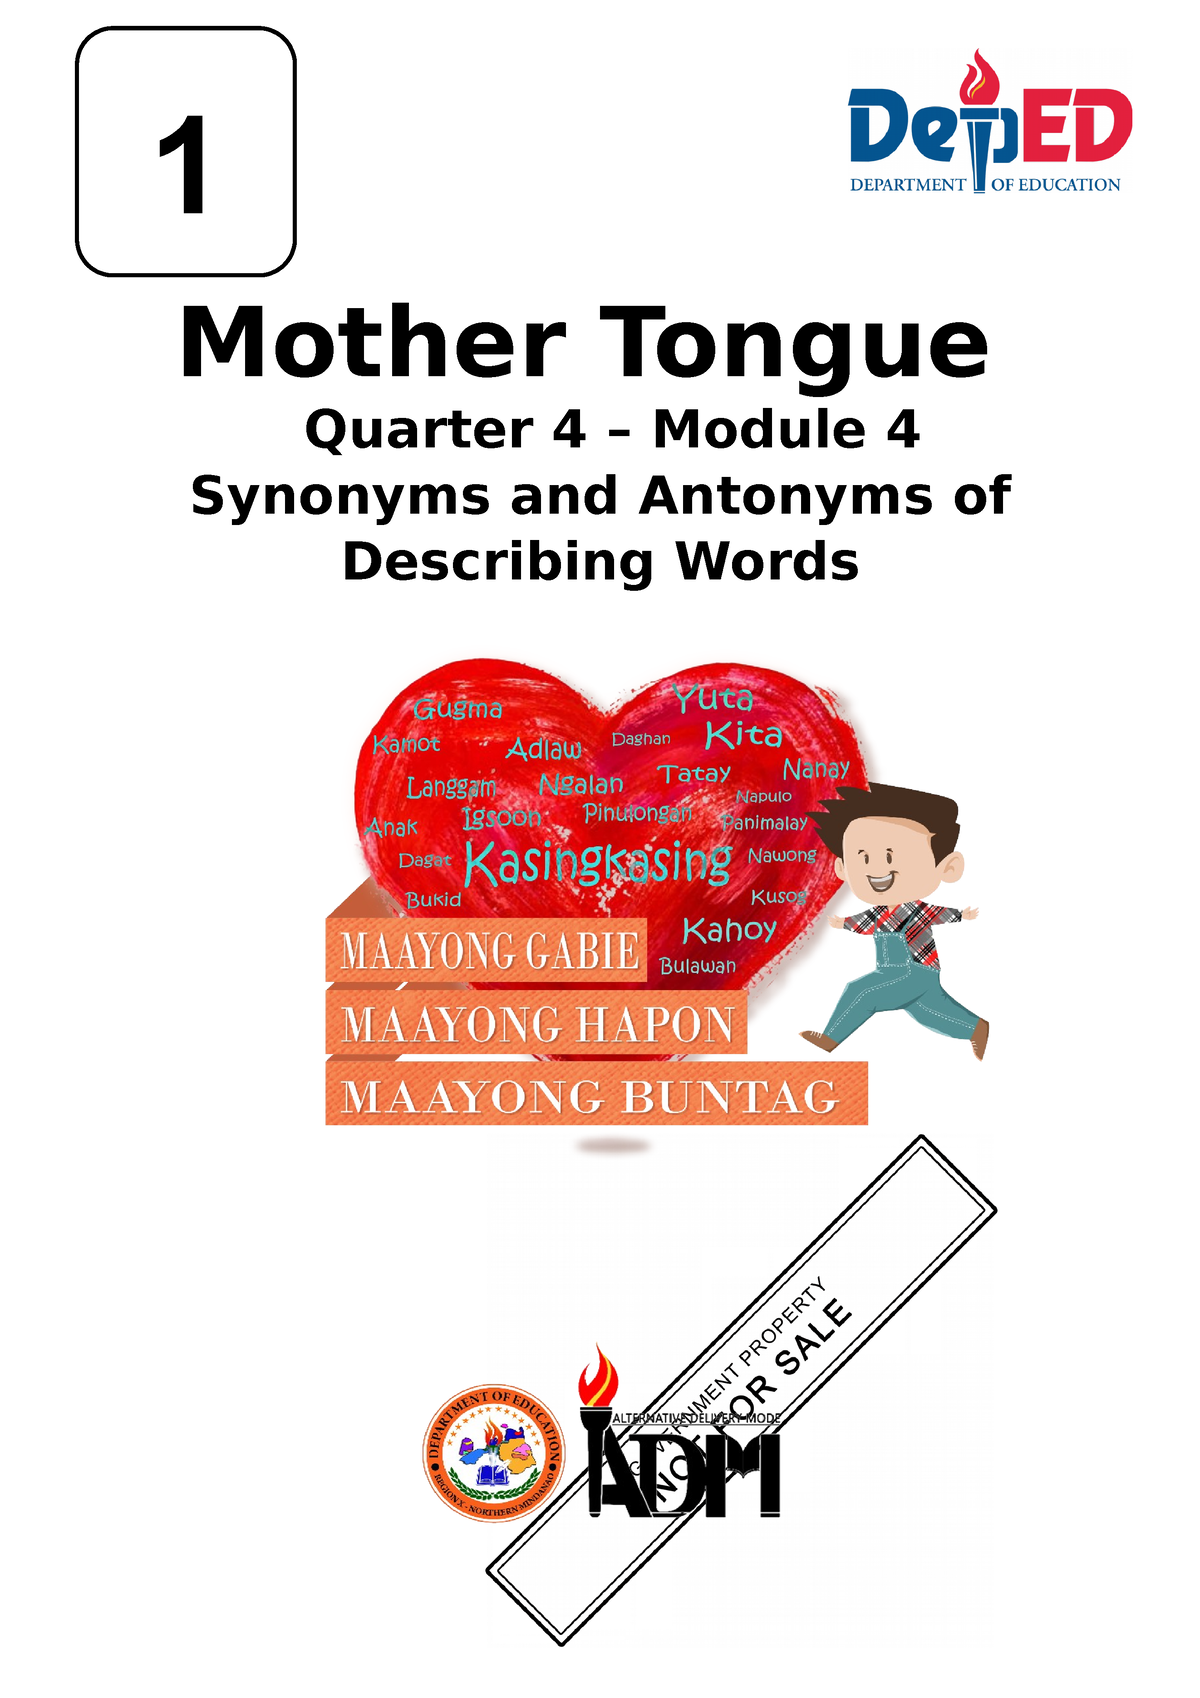 MTB1 Q4 Mod4 Synonyms-and-Antonyms-of-Describing-Words V4 - Mother